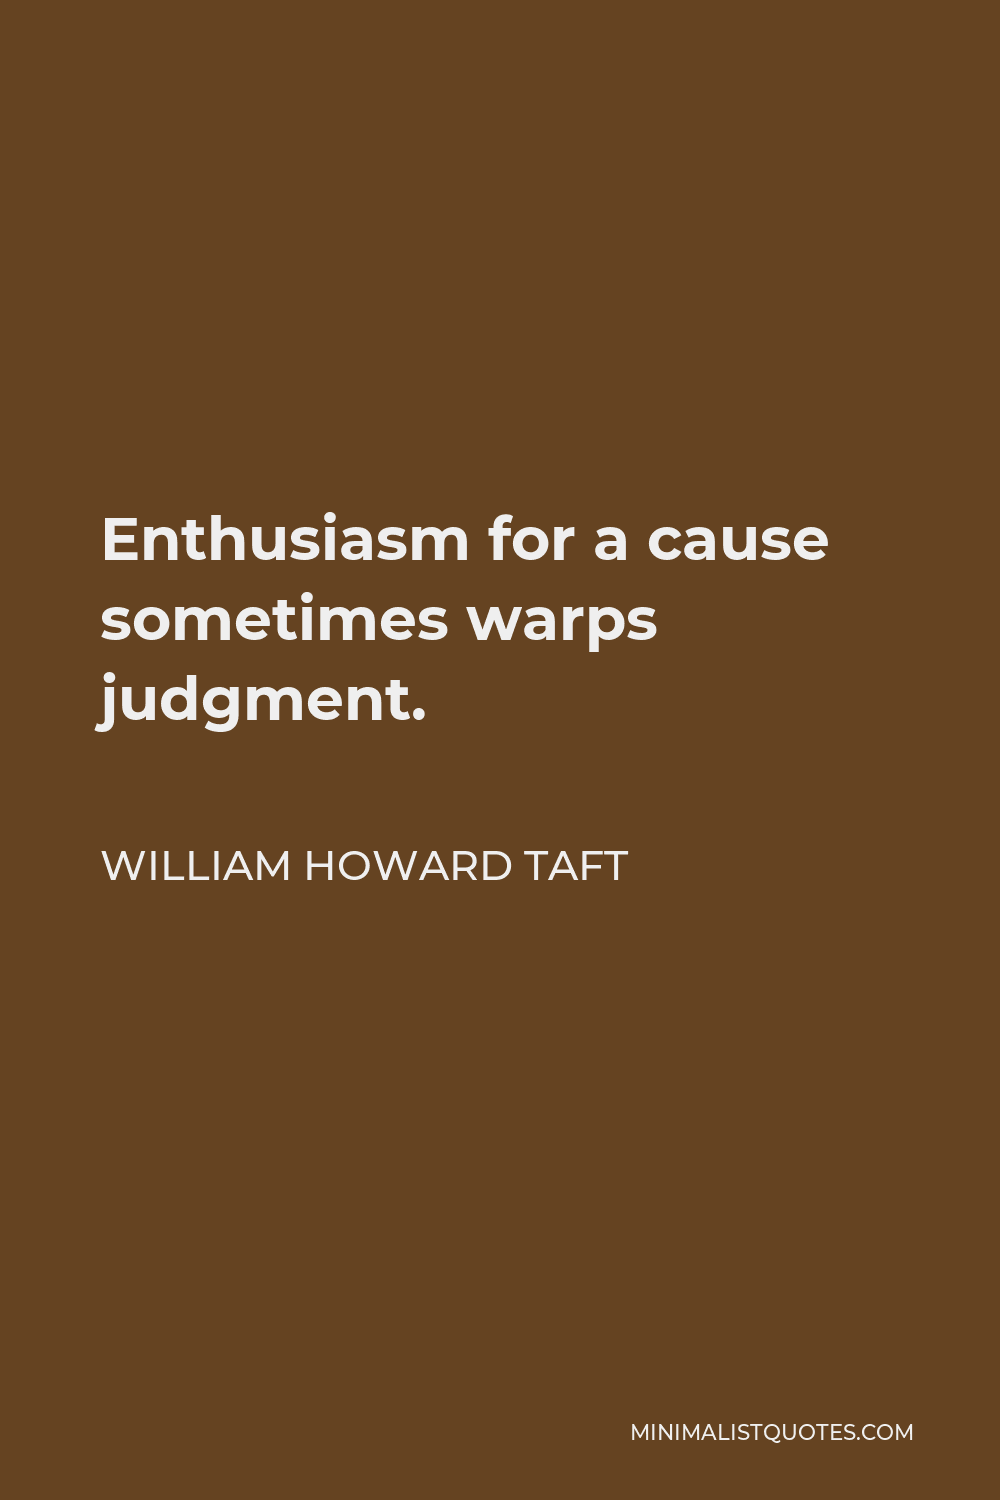 William Howard Taft Quote - Enthusiasm for a cause sometimes warps judgment.